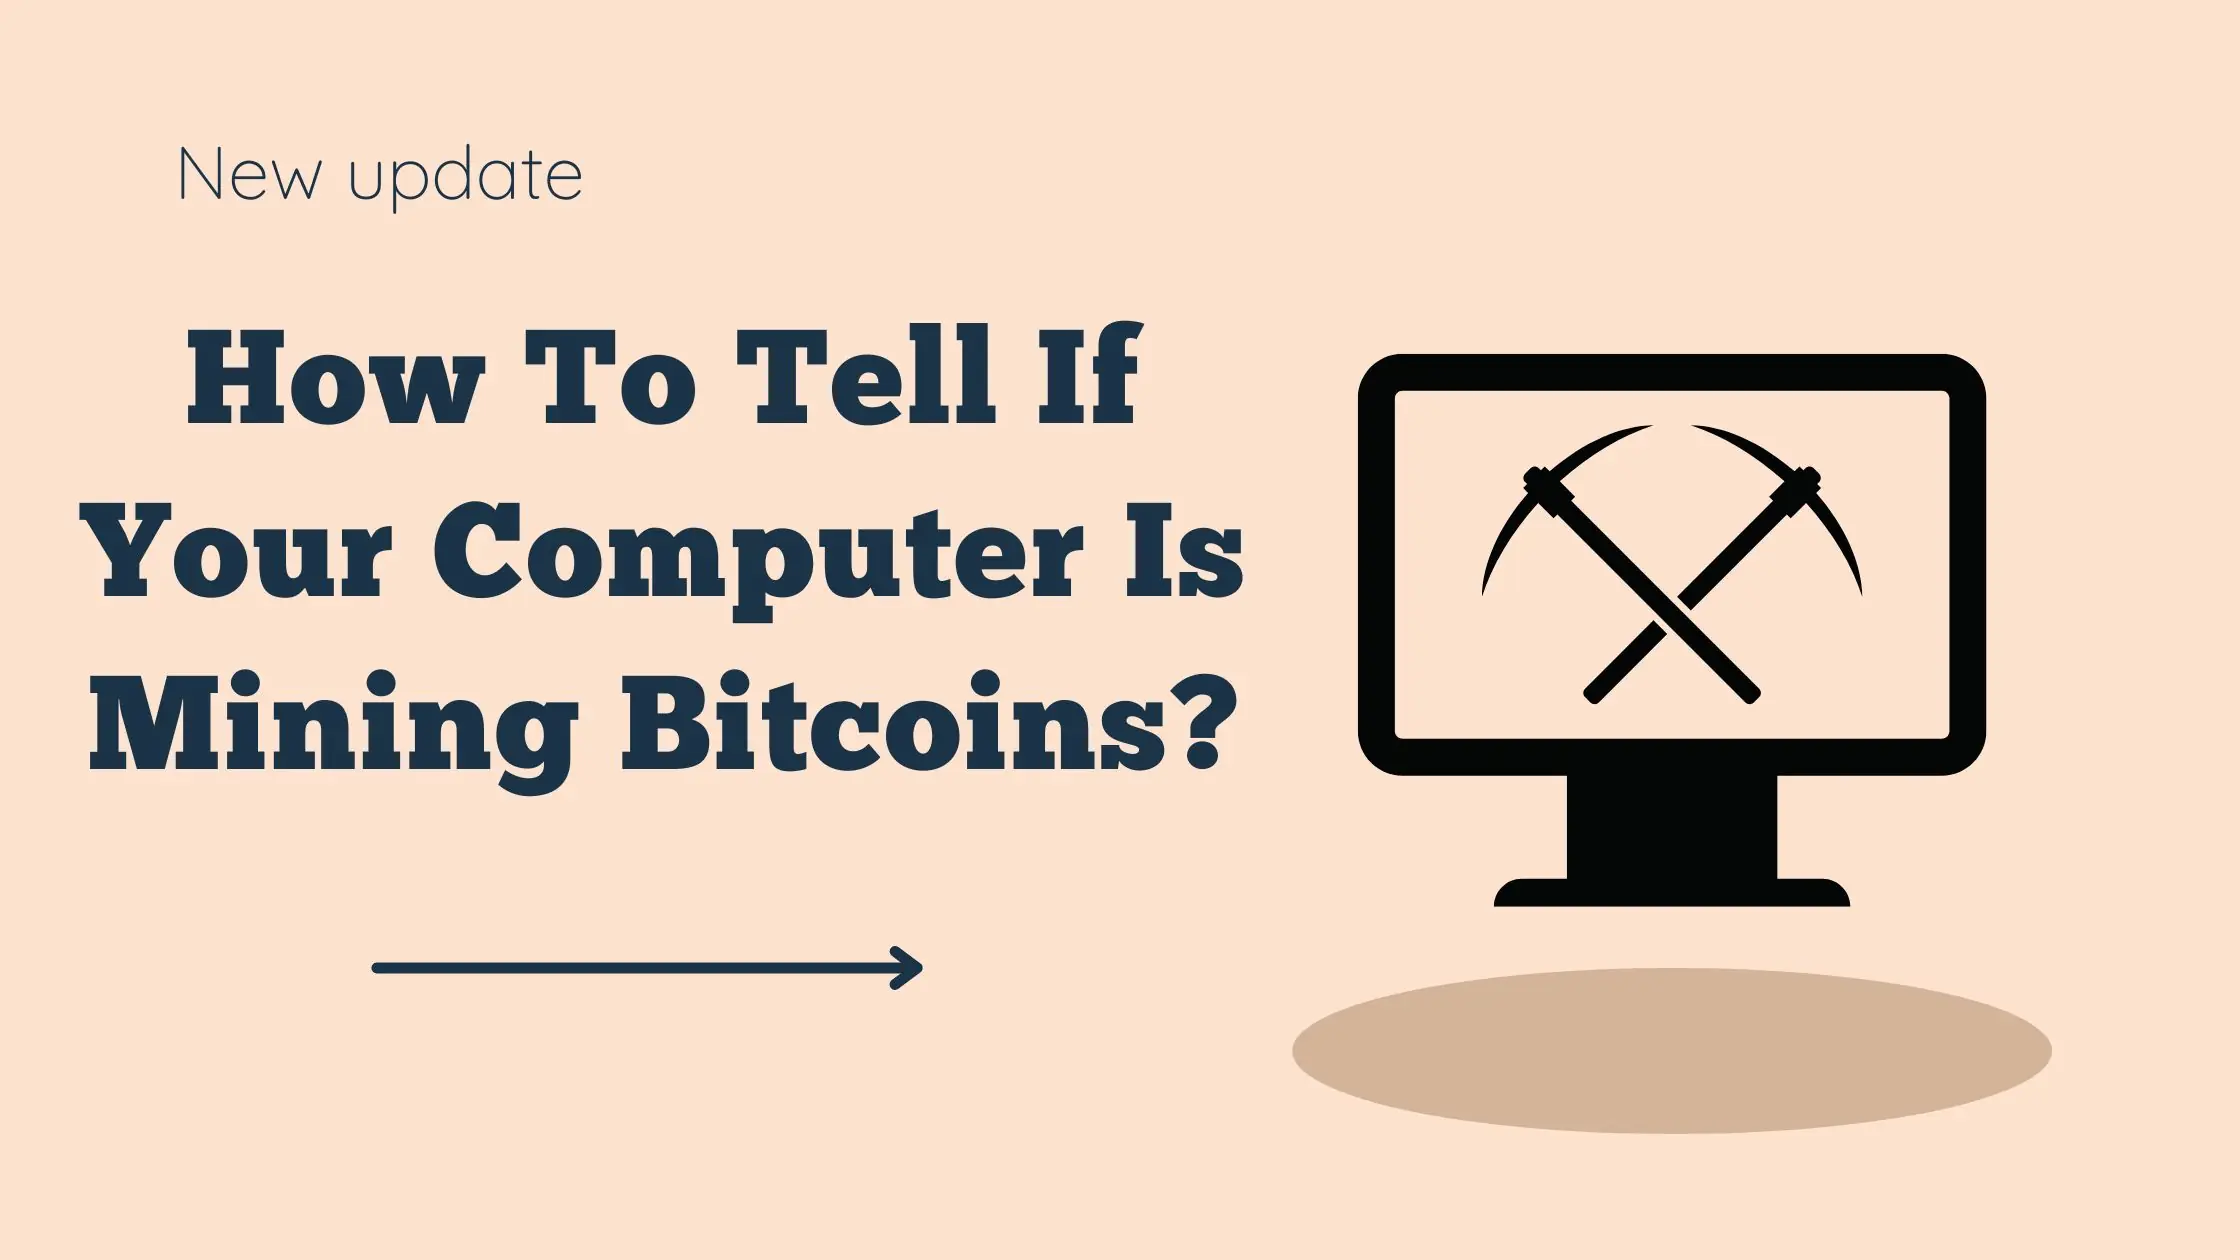 How To Tell If Your Computer Is Mining Bitcoins?